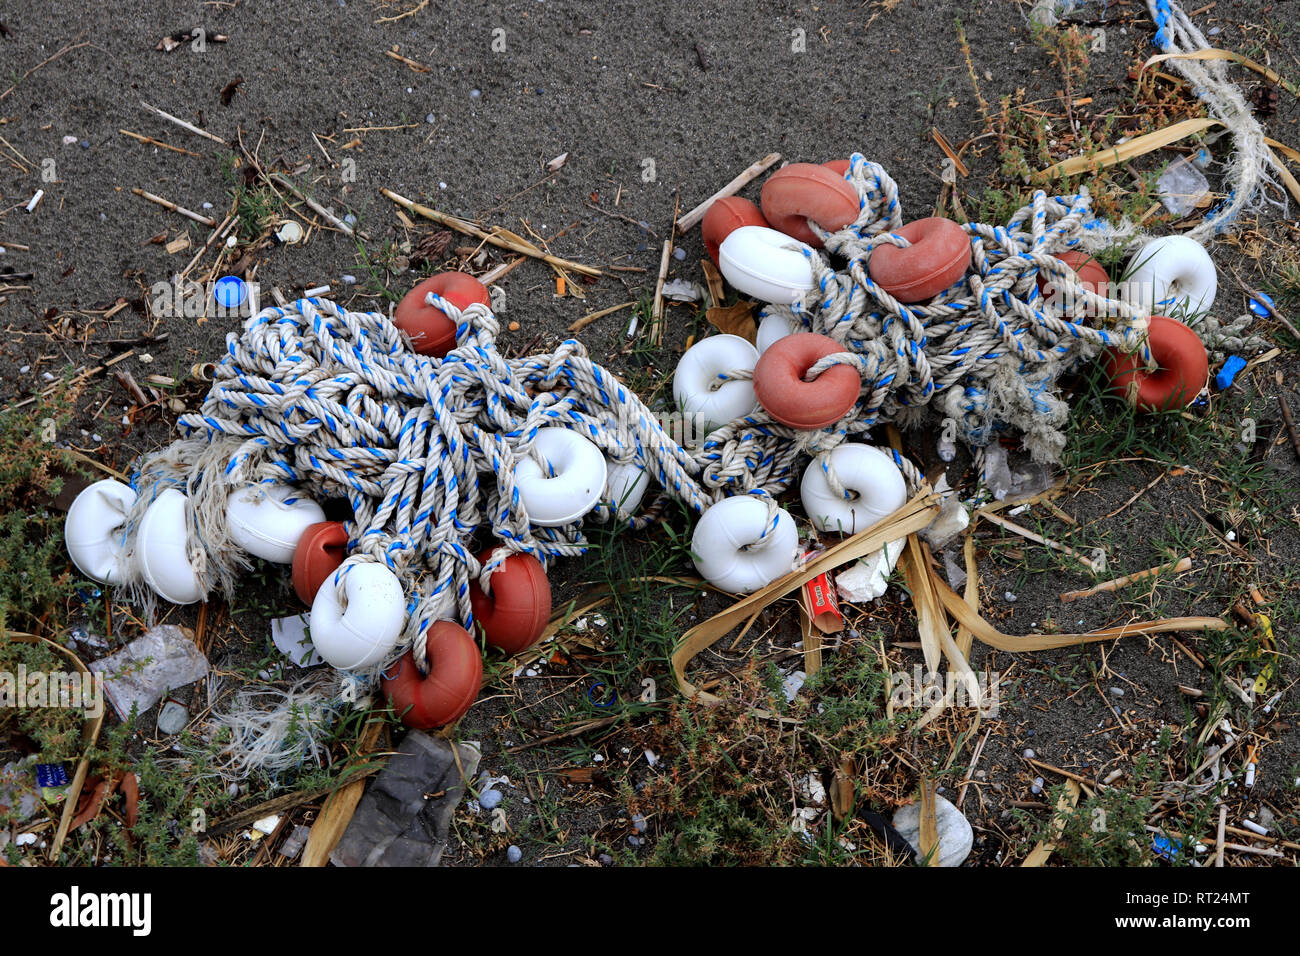 Mixed up ropes with lot of buoys on the beach with garbage. Stock Photo